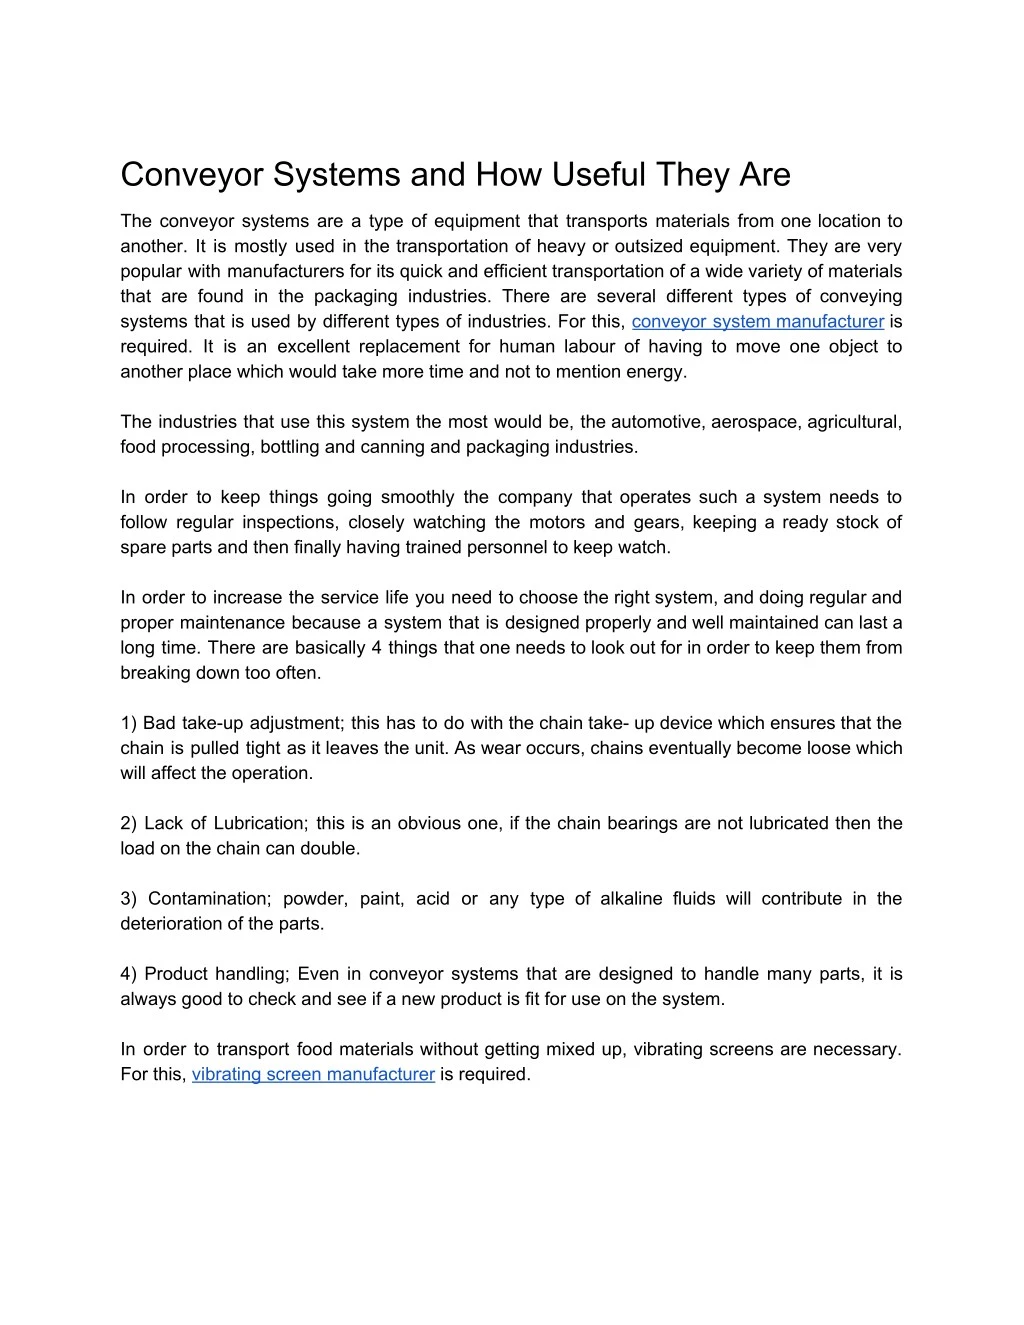 conveyor systems and how useful they are